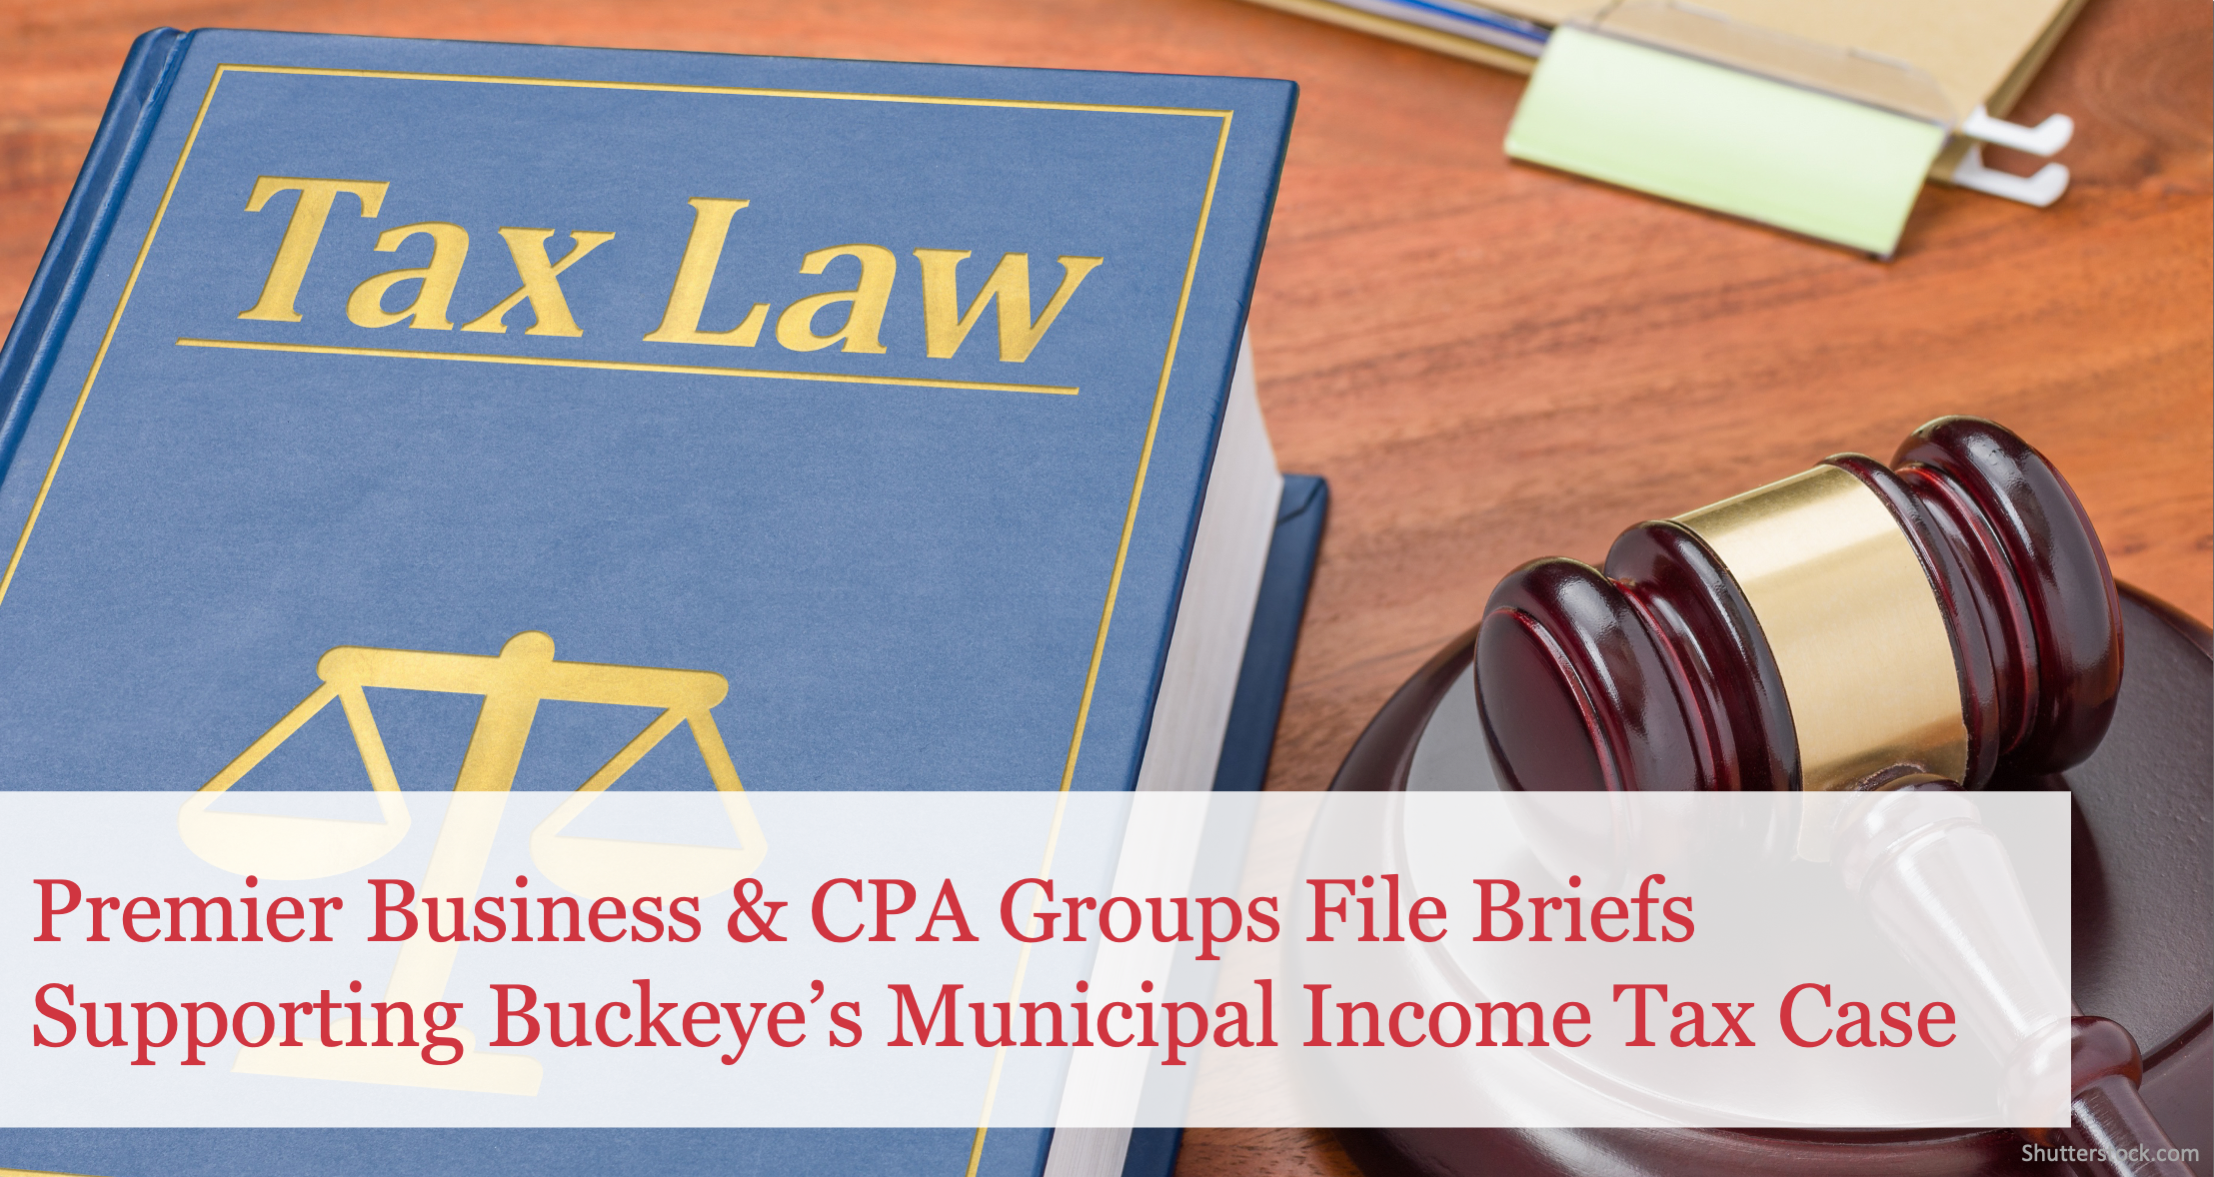 Premier Business and CPA Groups File Briefs Supporting The Buckeye Institute’s Municipal Income Tax Case